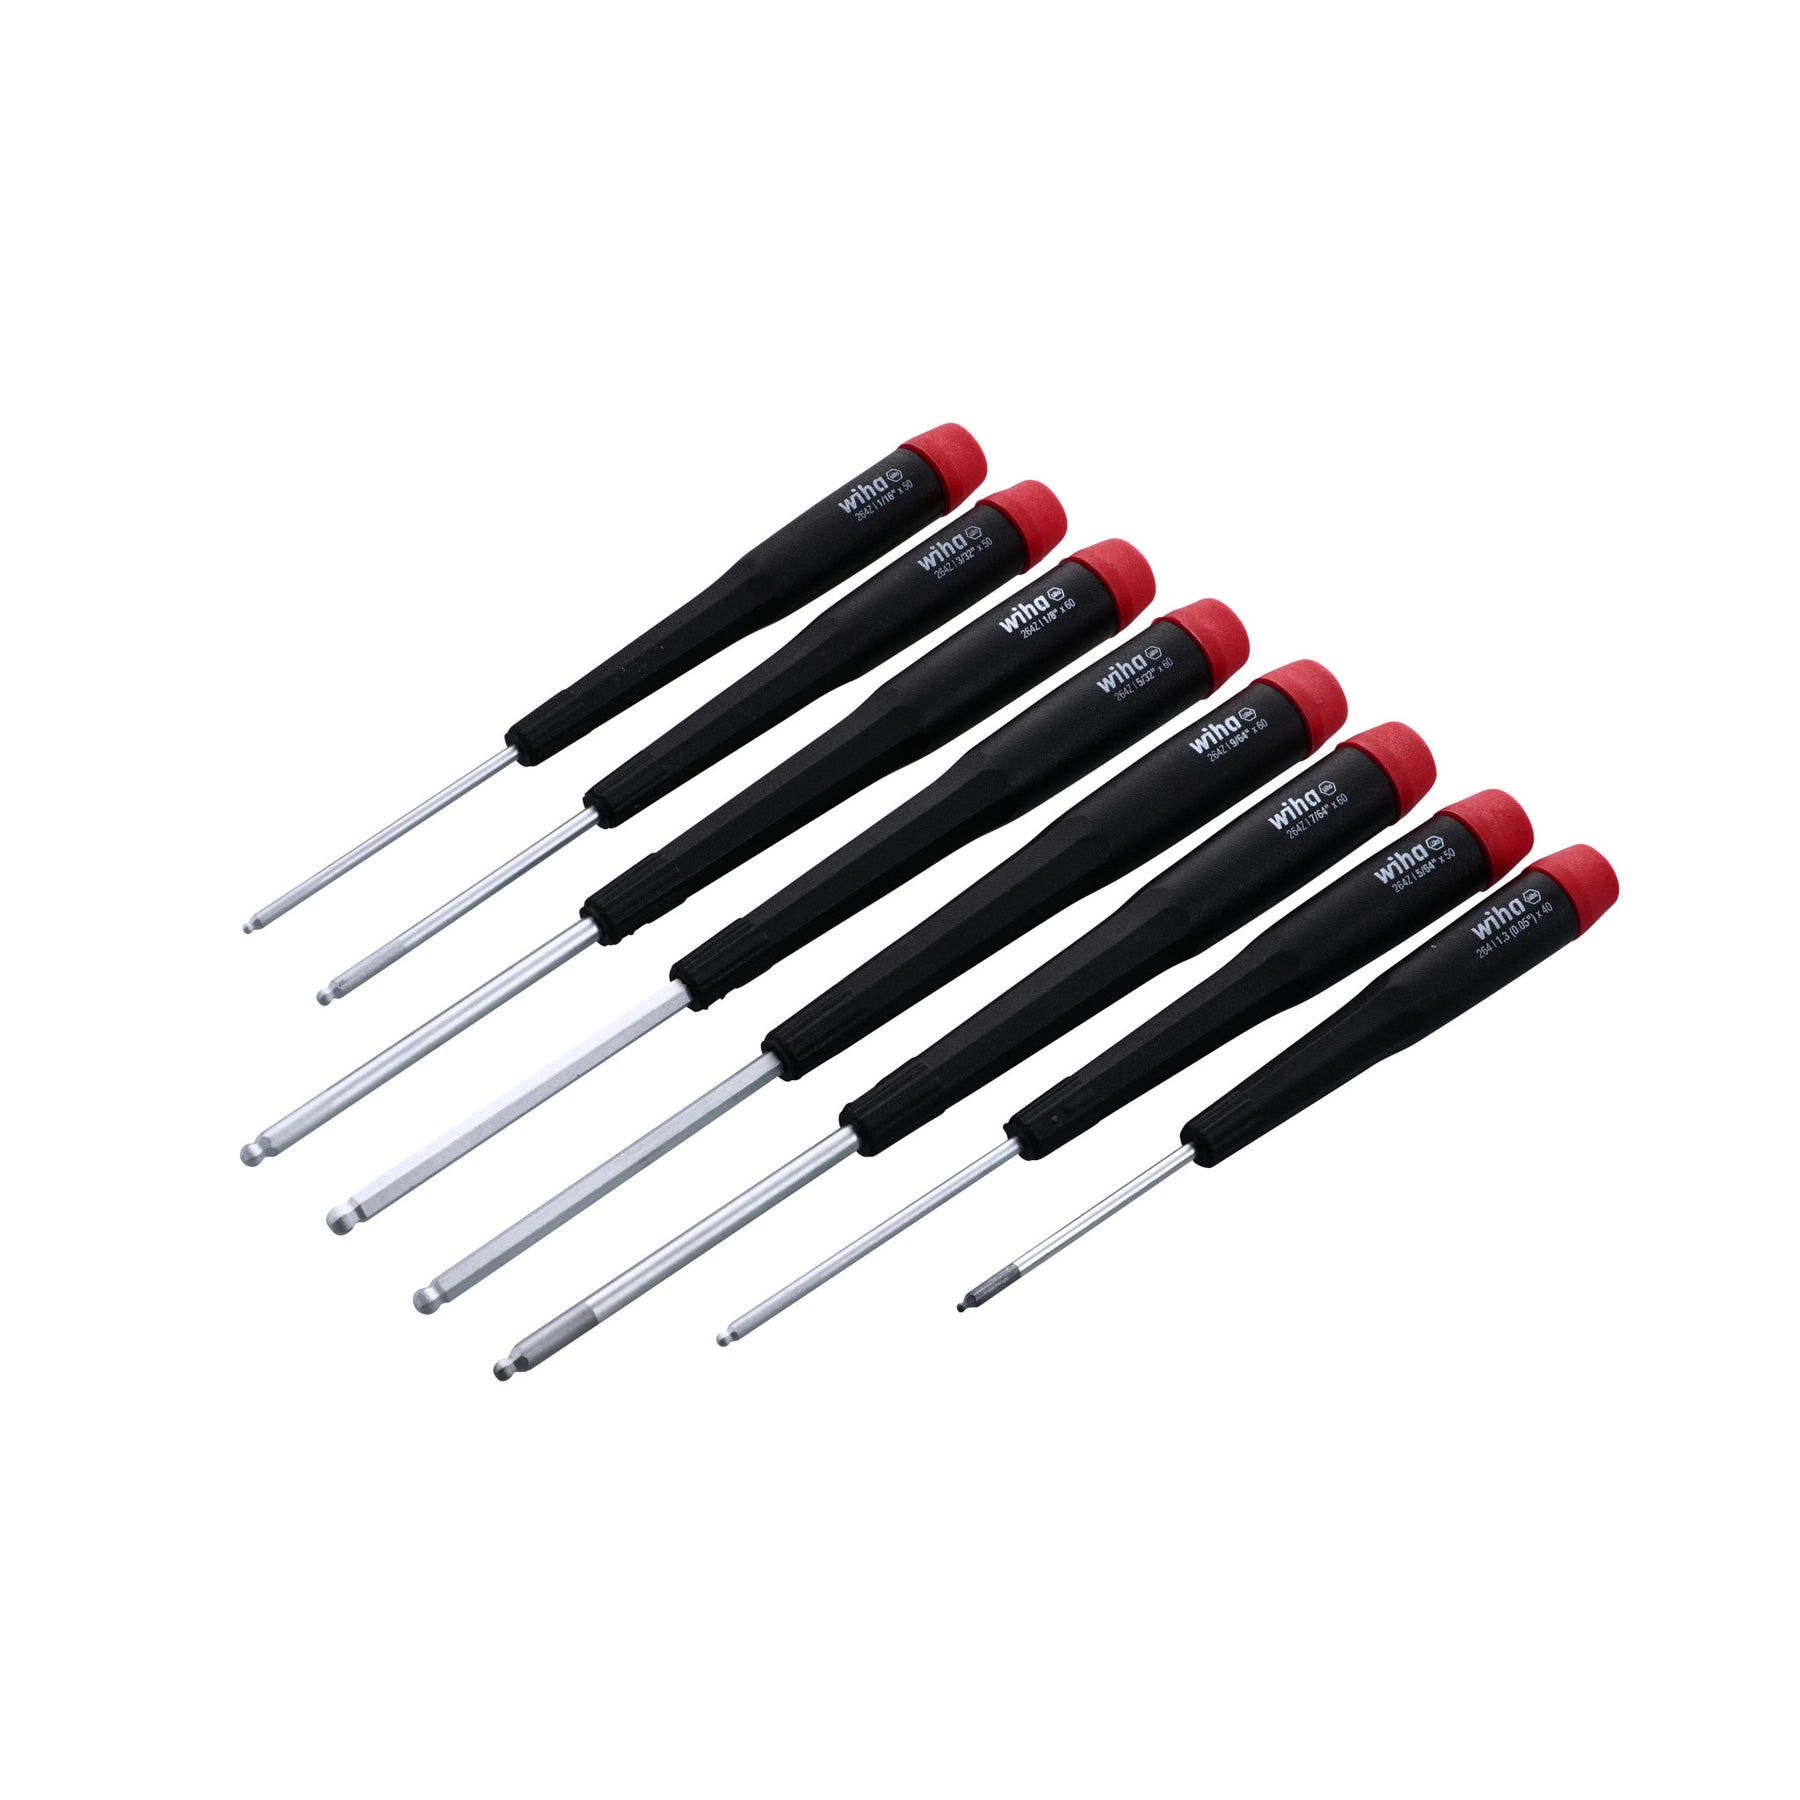 8 Piece Precision Ball End Hex Imperial Screwdriver Set - Inch